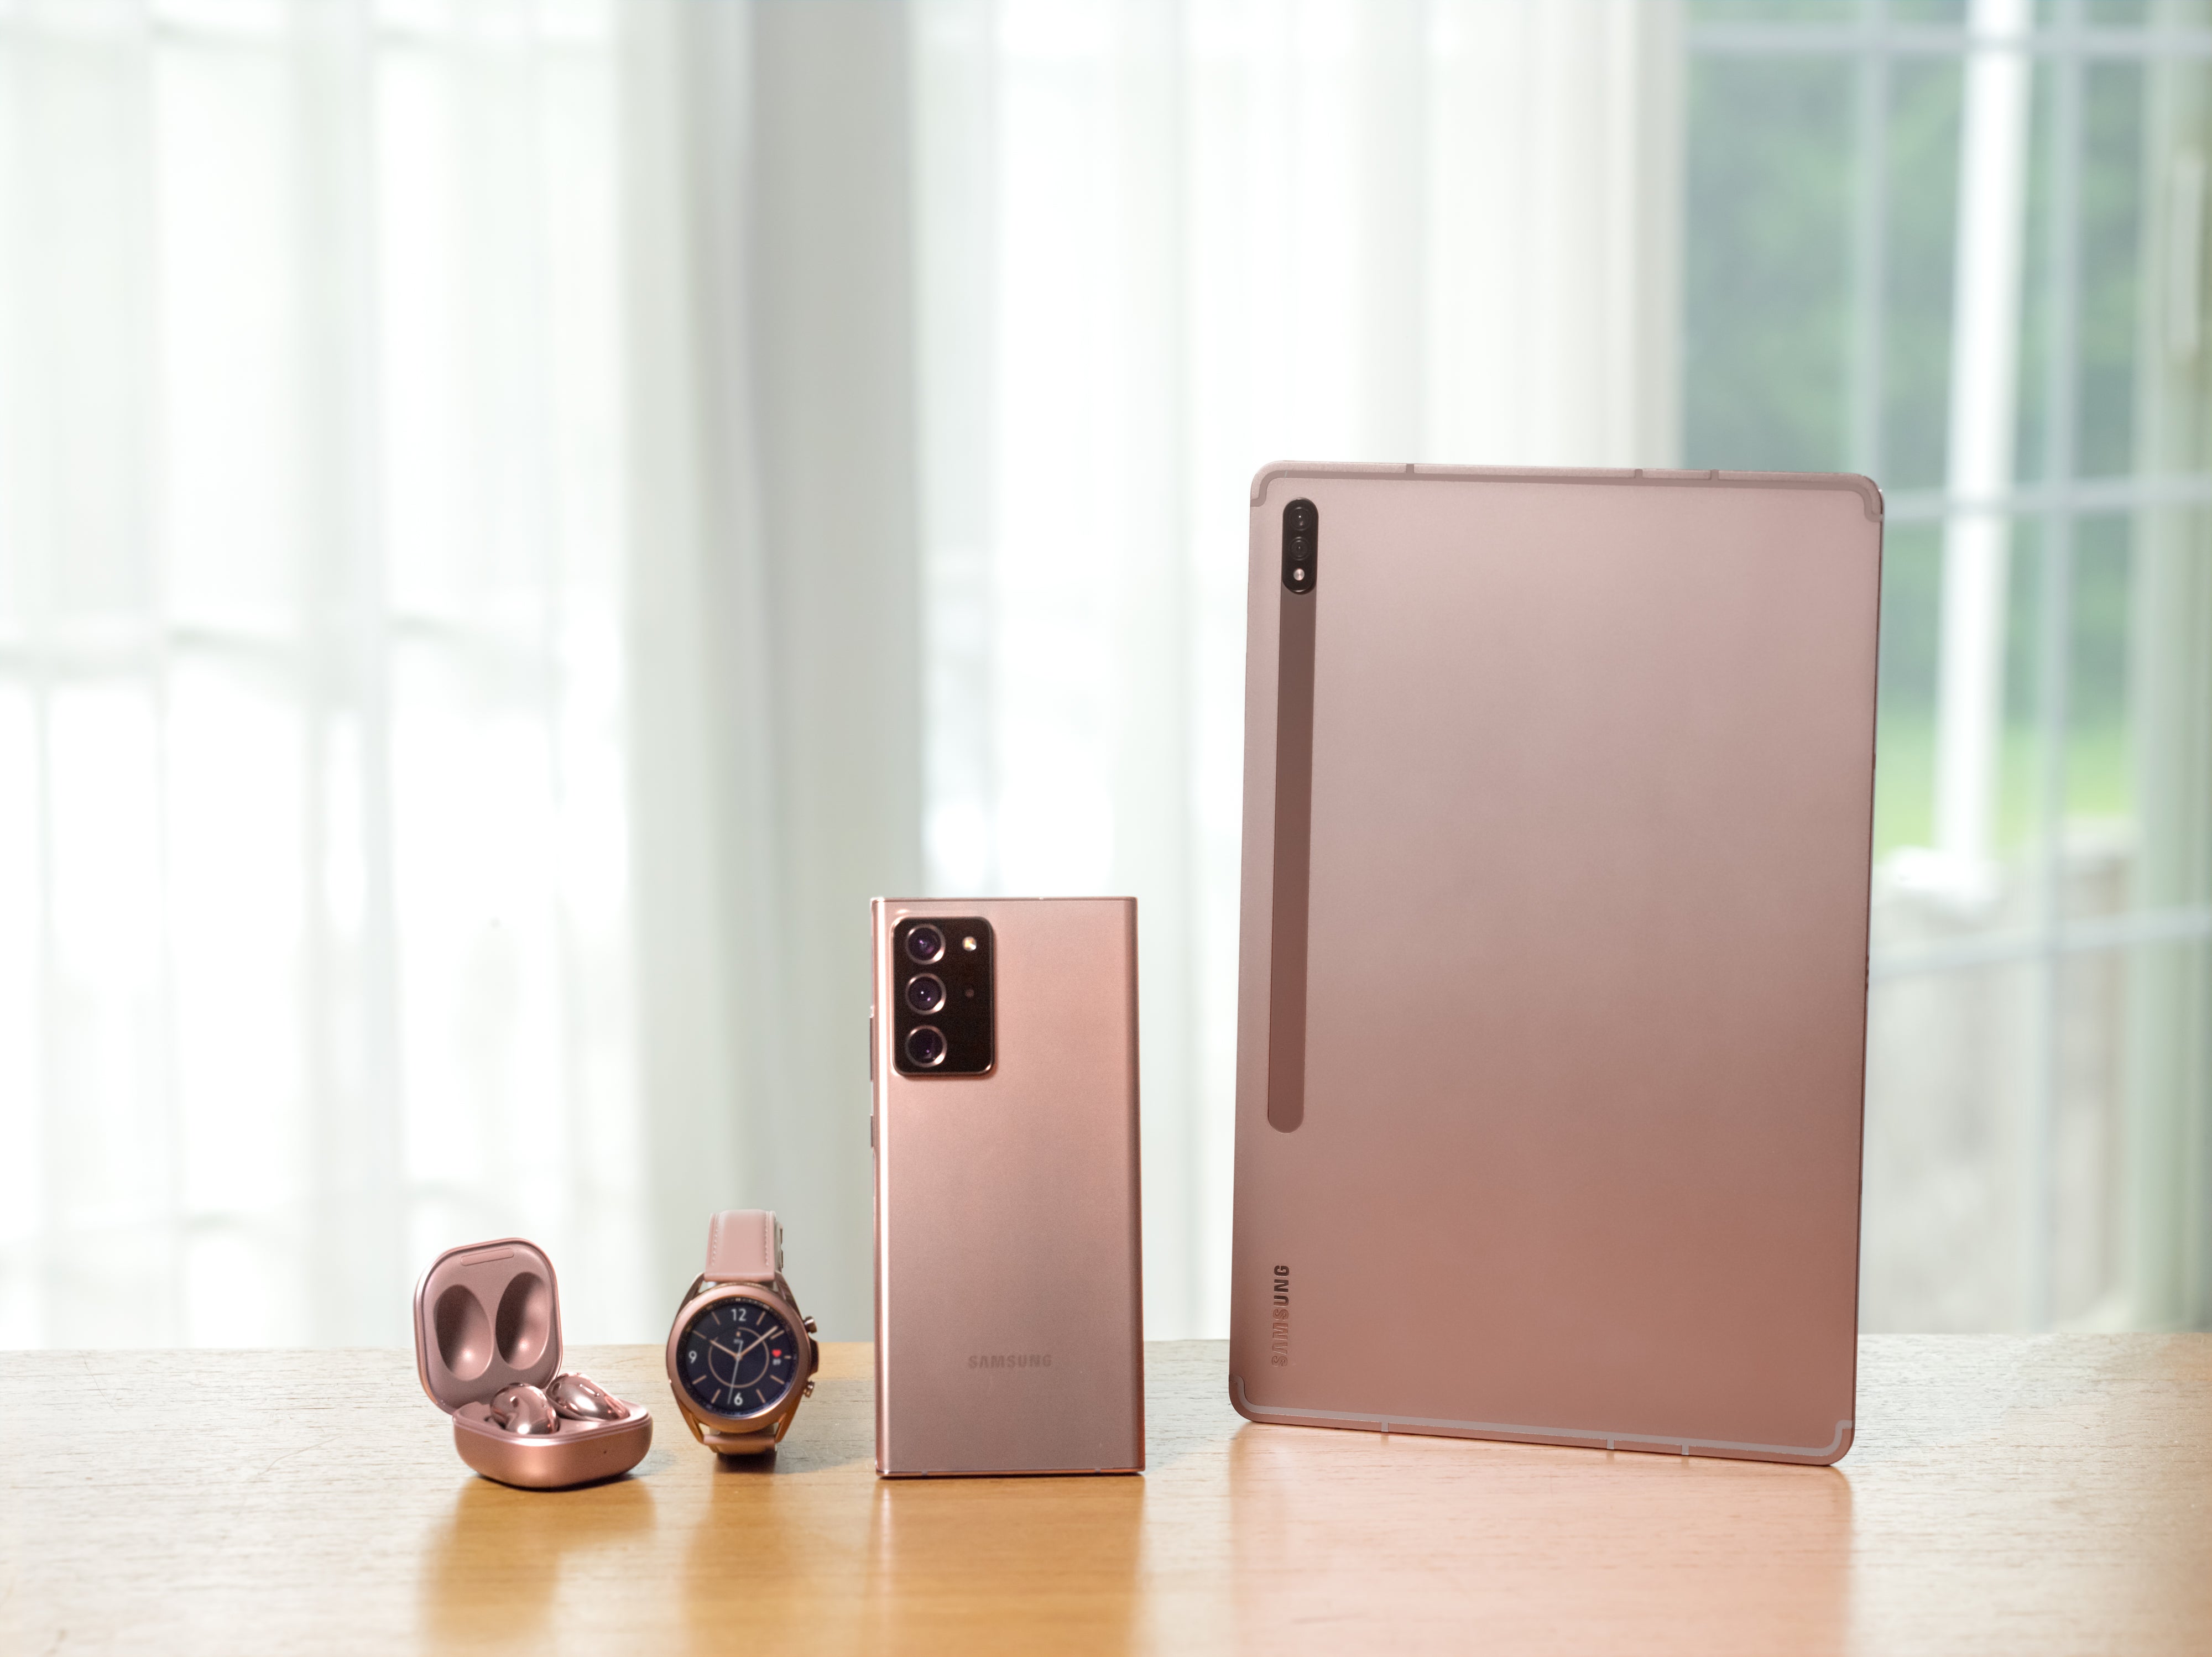 Matching Mystic Bronze Galaxy Note 20 and Galaxy Watch 3, Buds Live and Tab S7+ - Which Galaxy Note 20 color should you get?